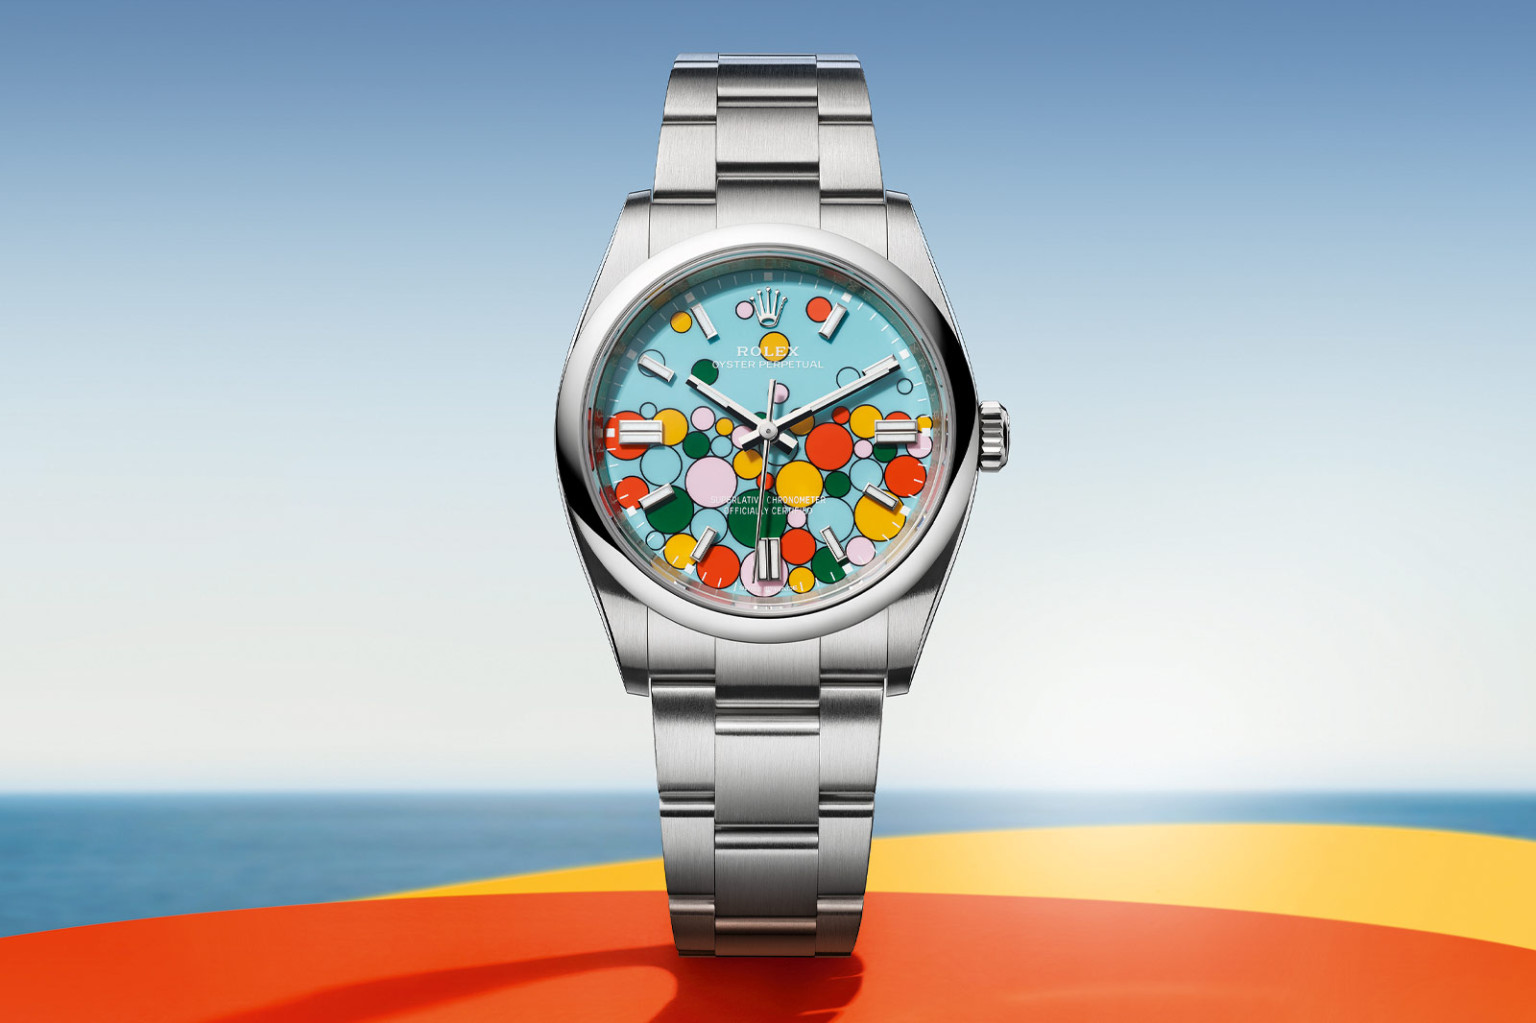 Why the Rolex Oyster Celebration dial is my kind of Rolex